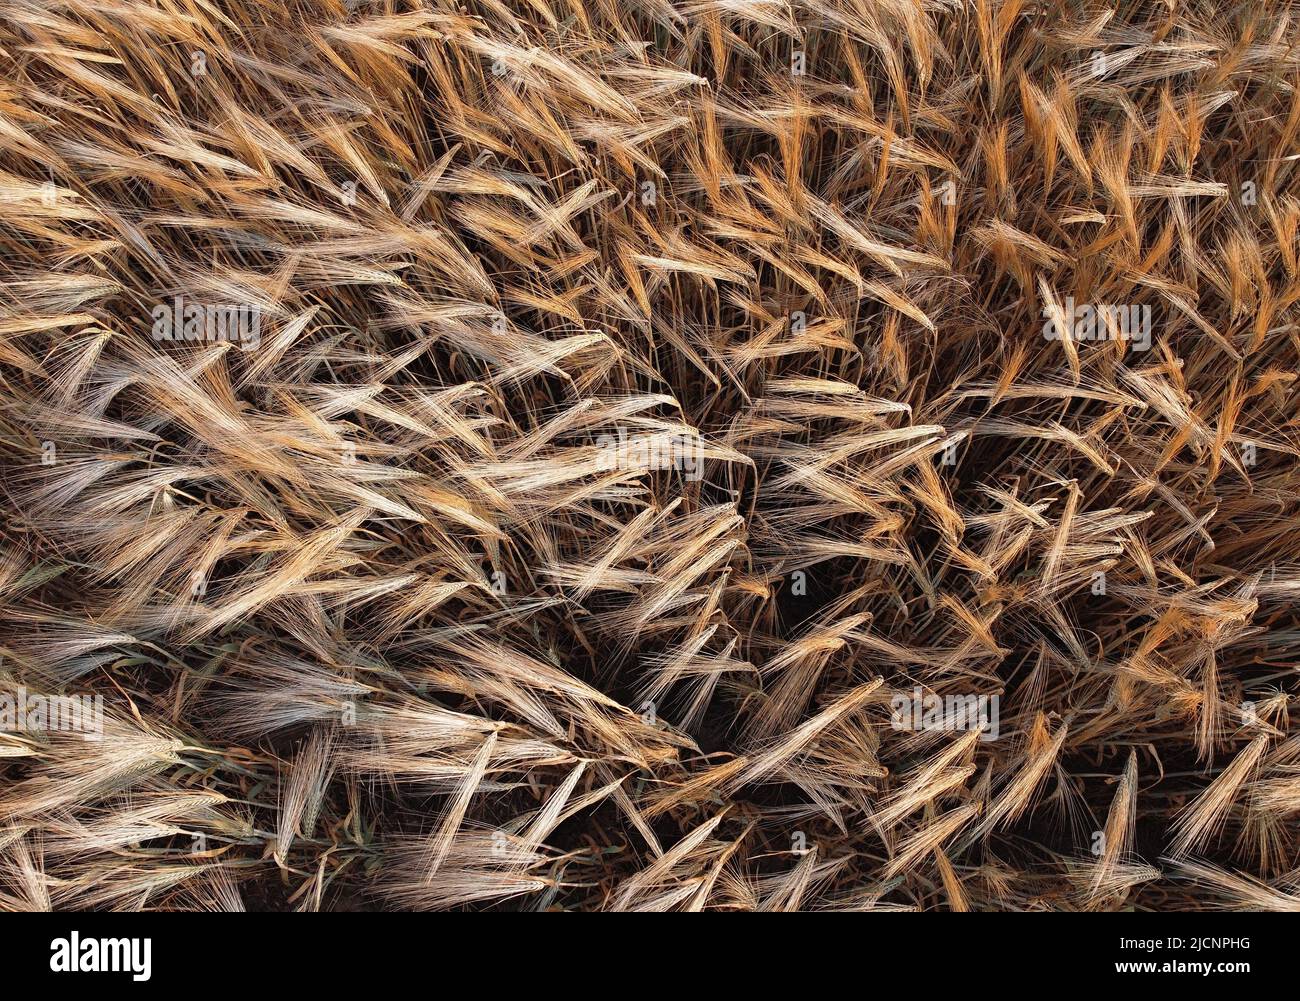 Full frame above view of golden wheat ears, natural background Stock Photo